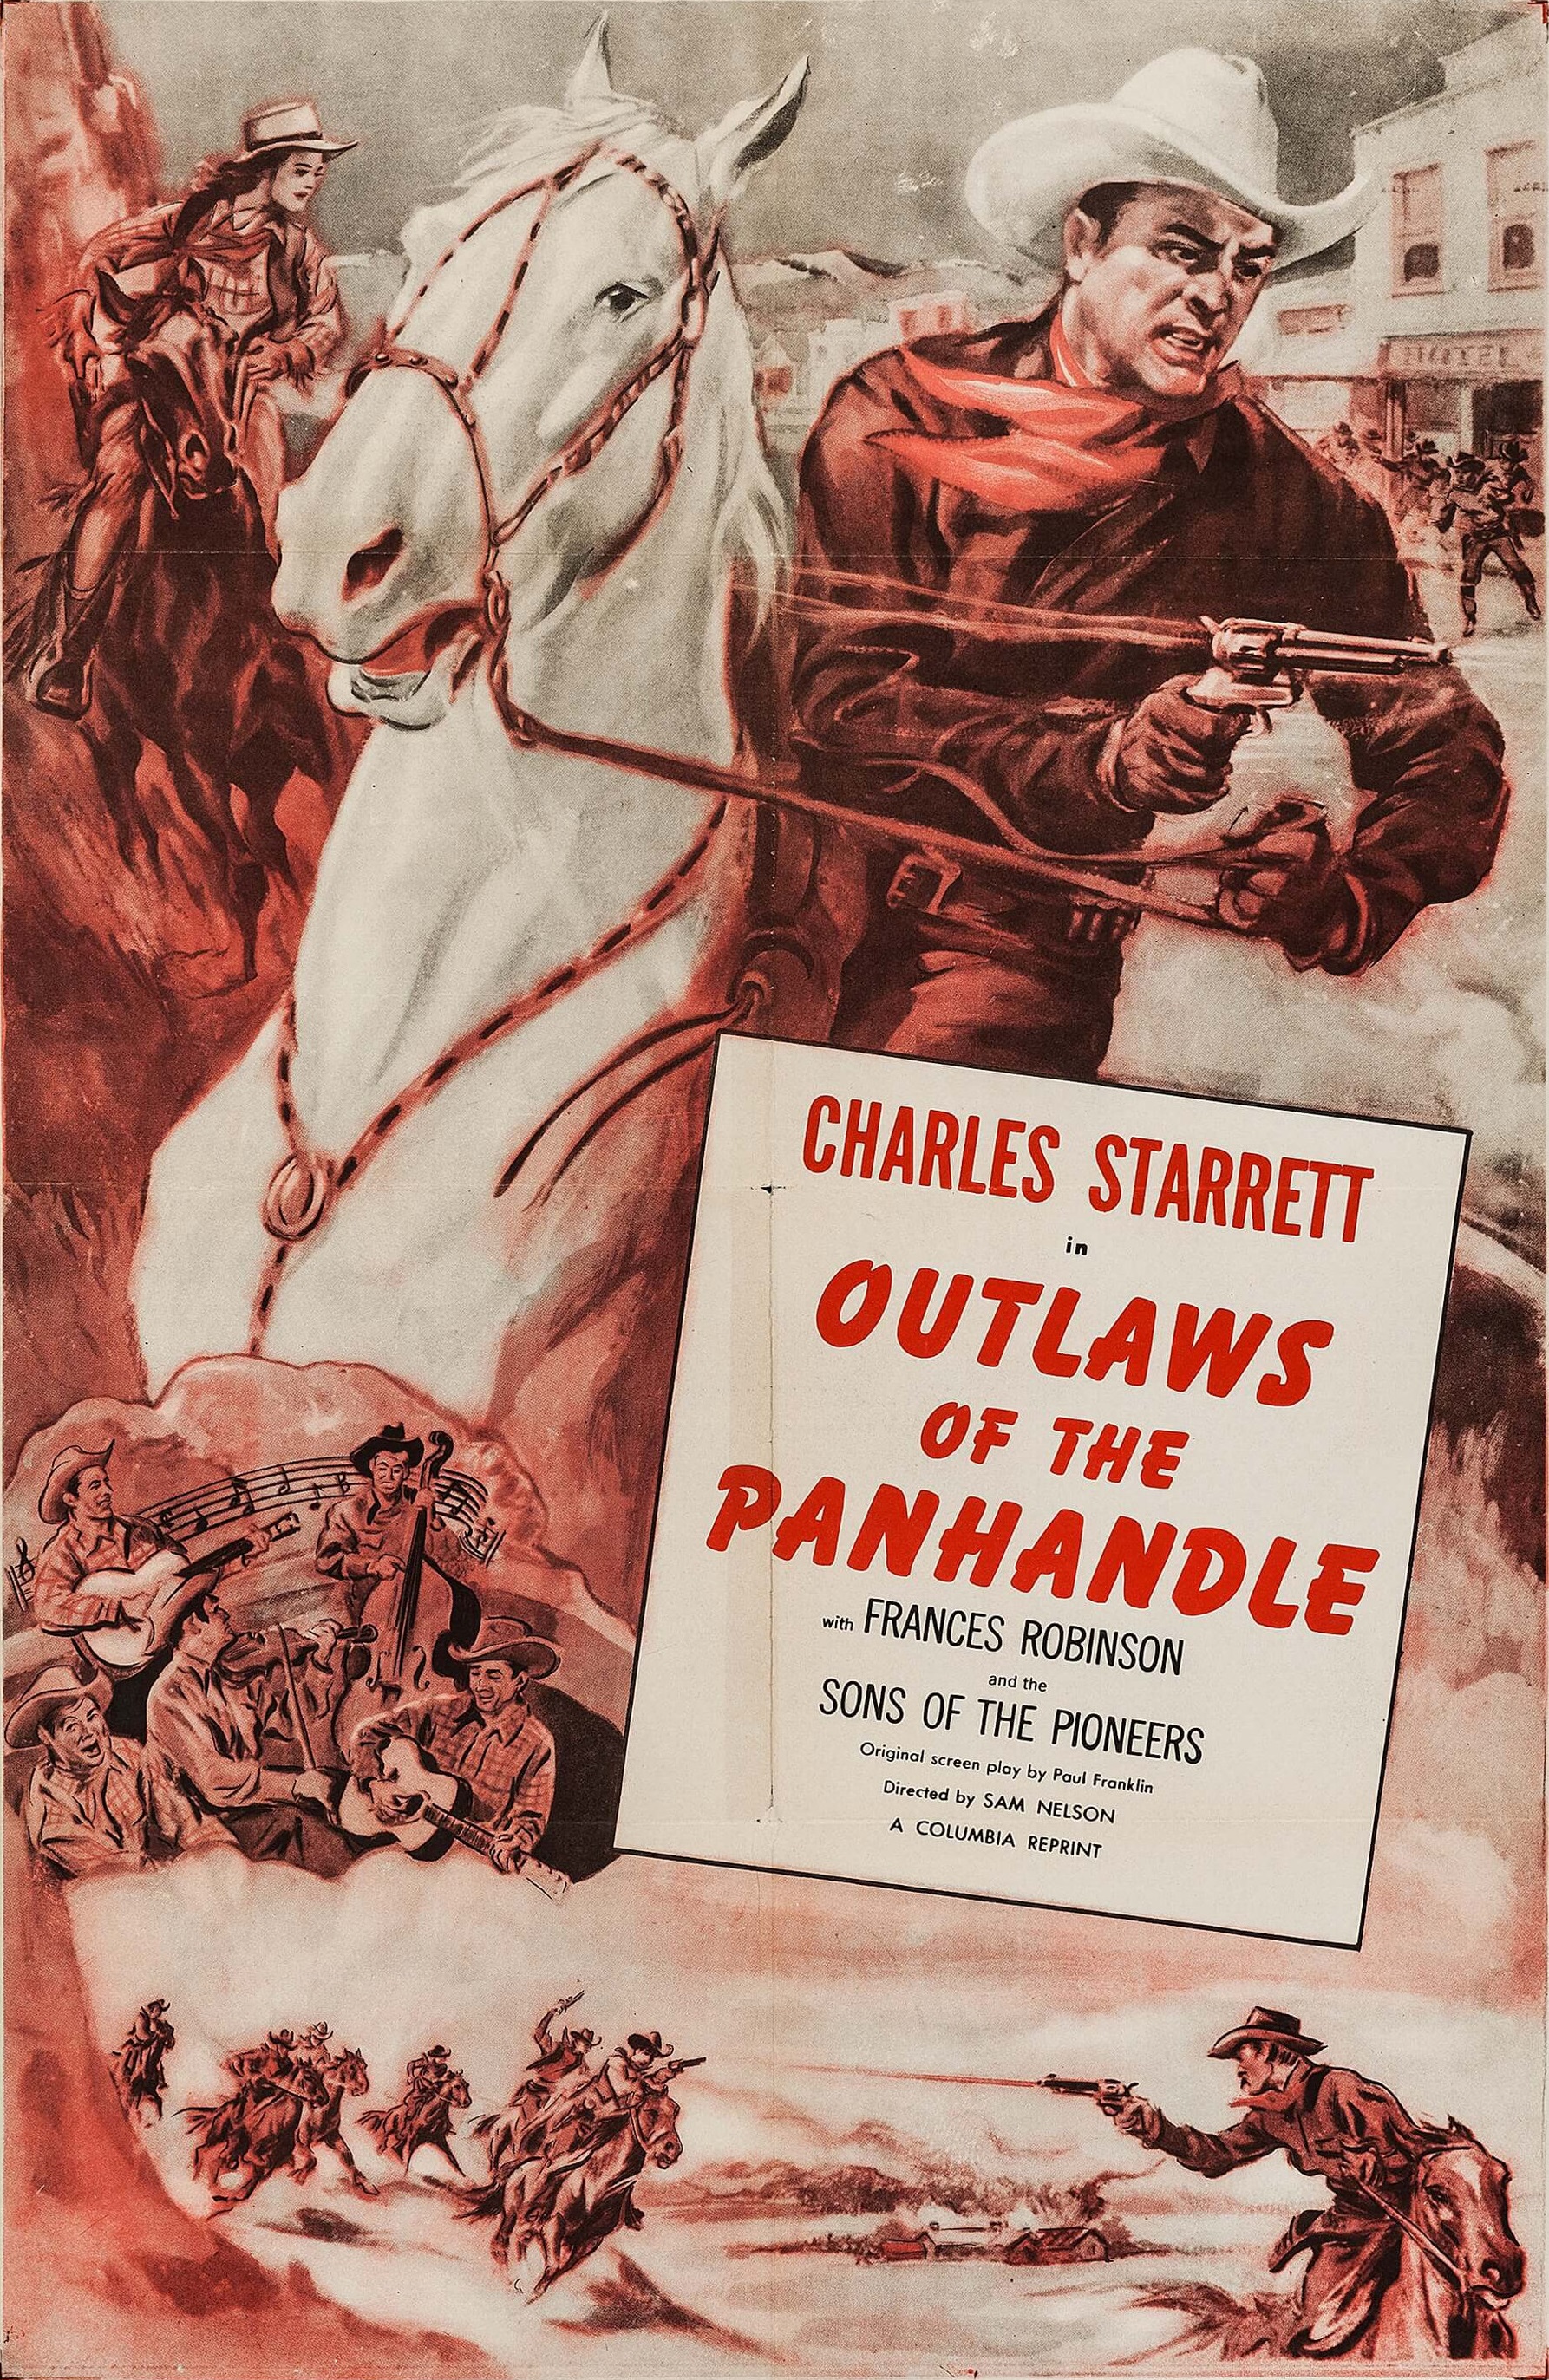 Outlaws of the Panhandle